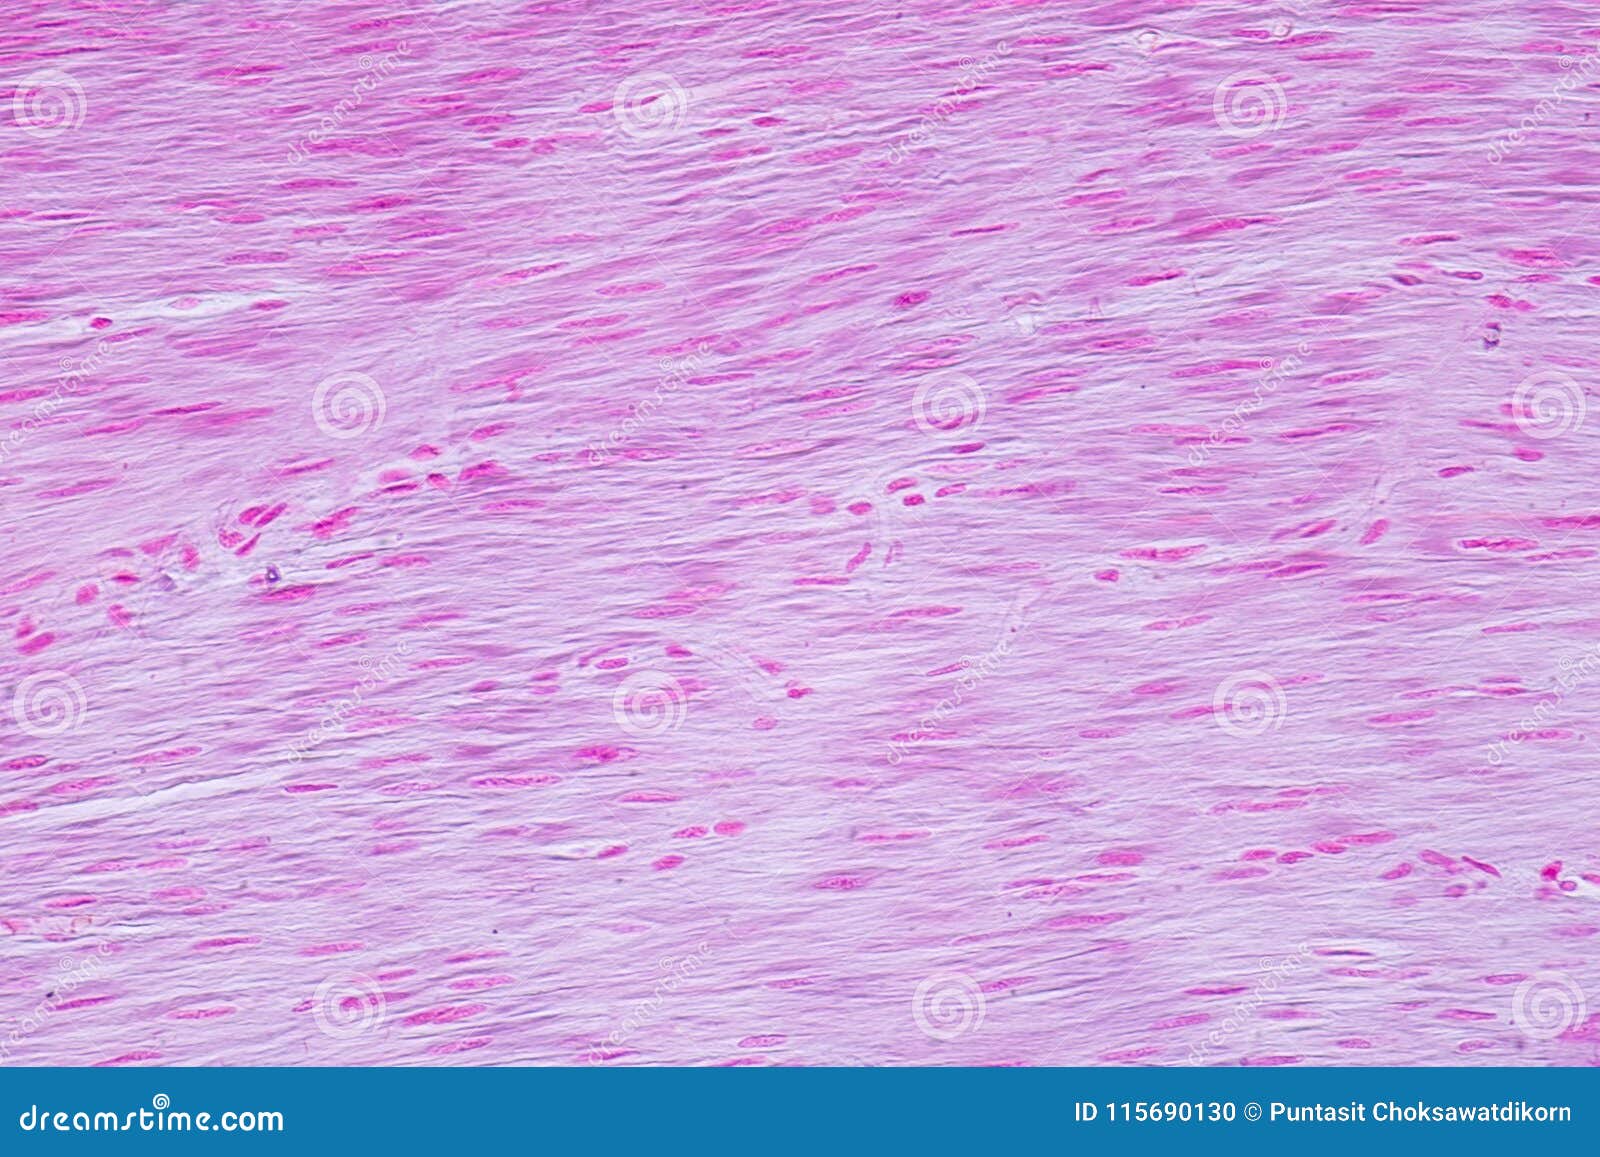 histology of human smooth muscle under microscope view for education